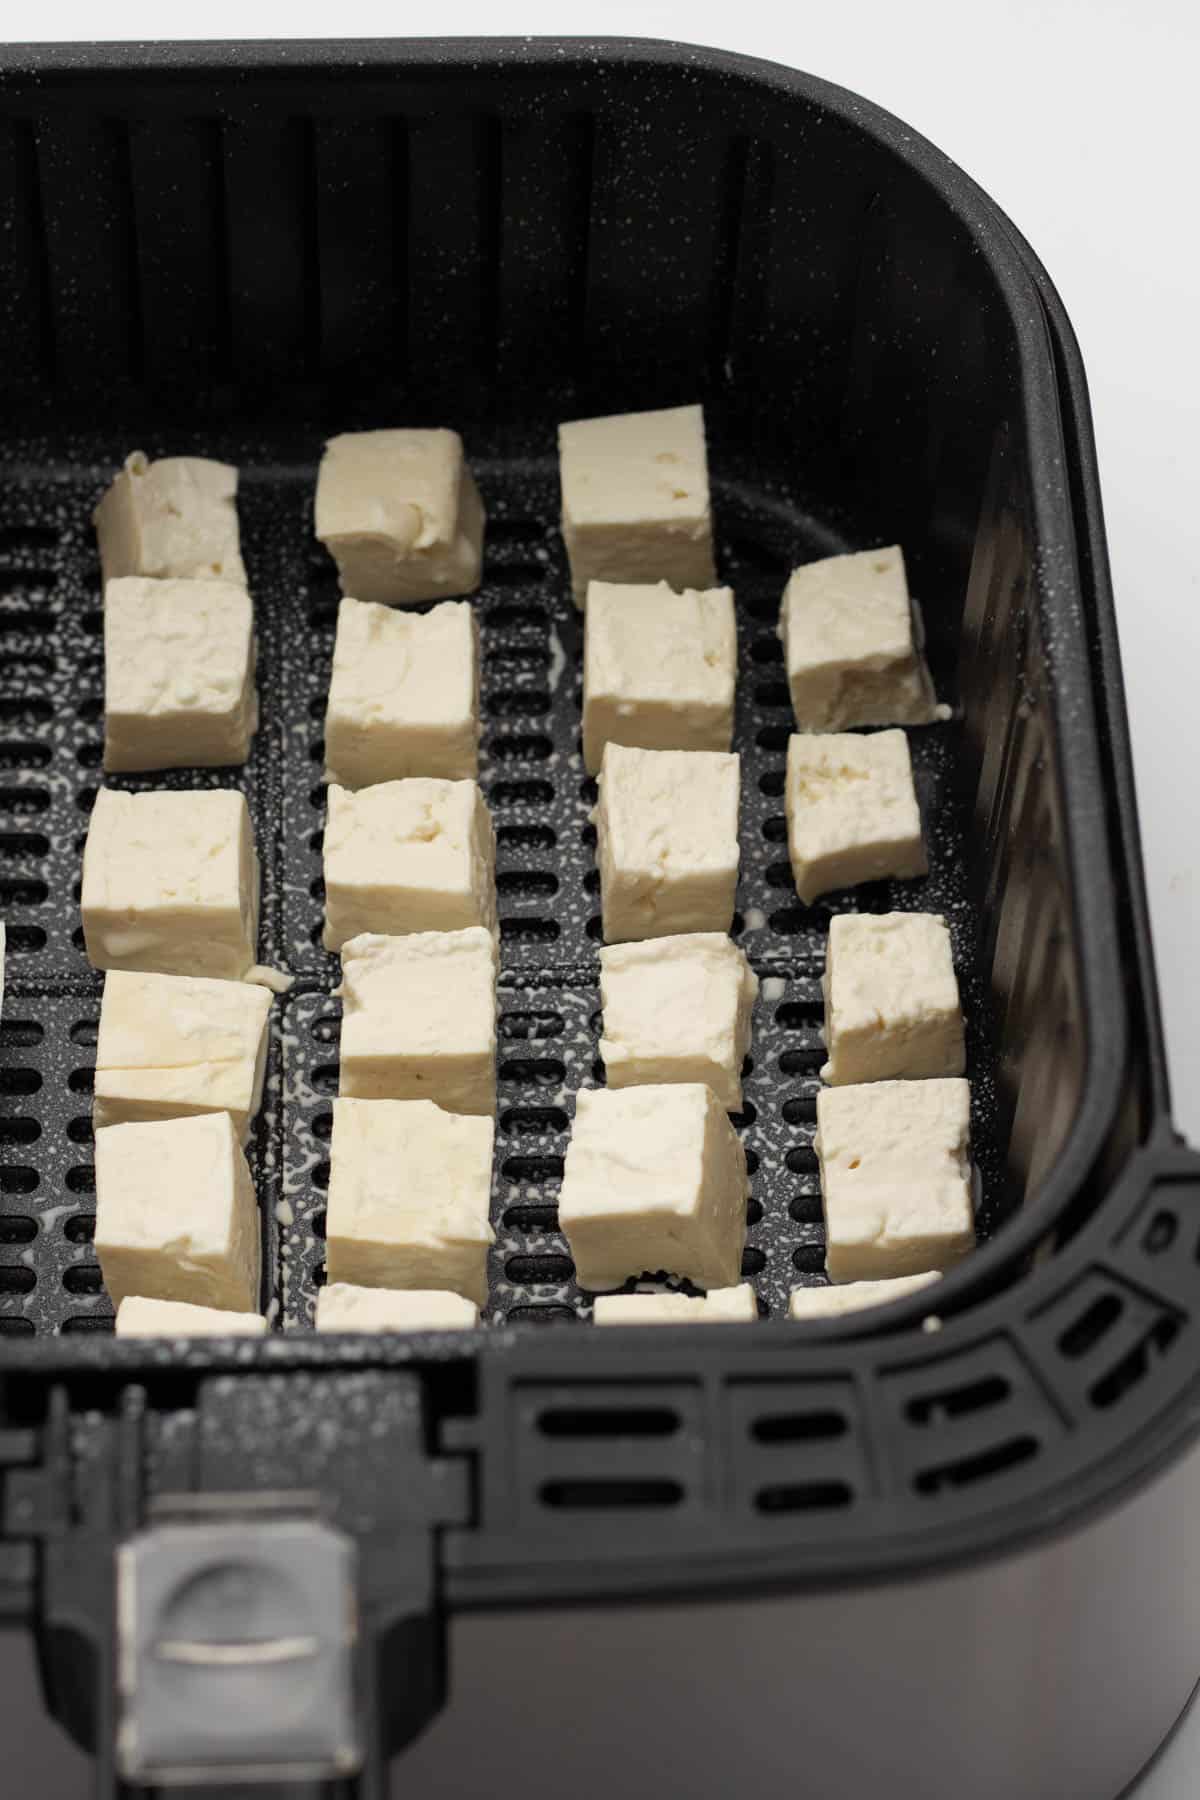 Tofu cubes cooked in an air fryer with salt and pepper.